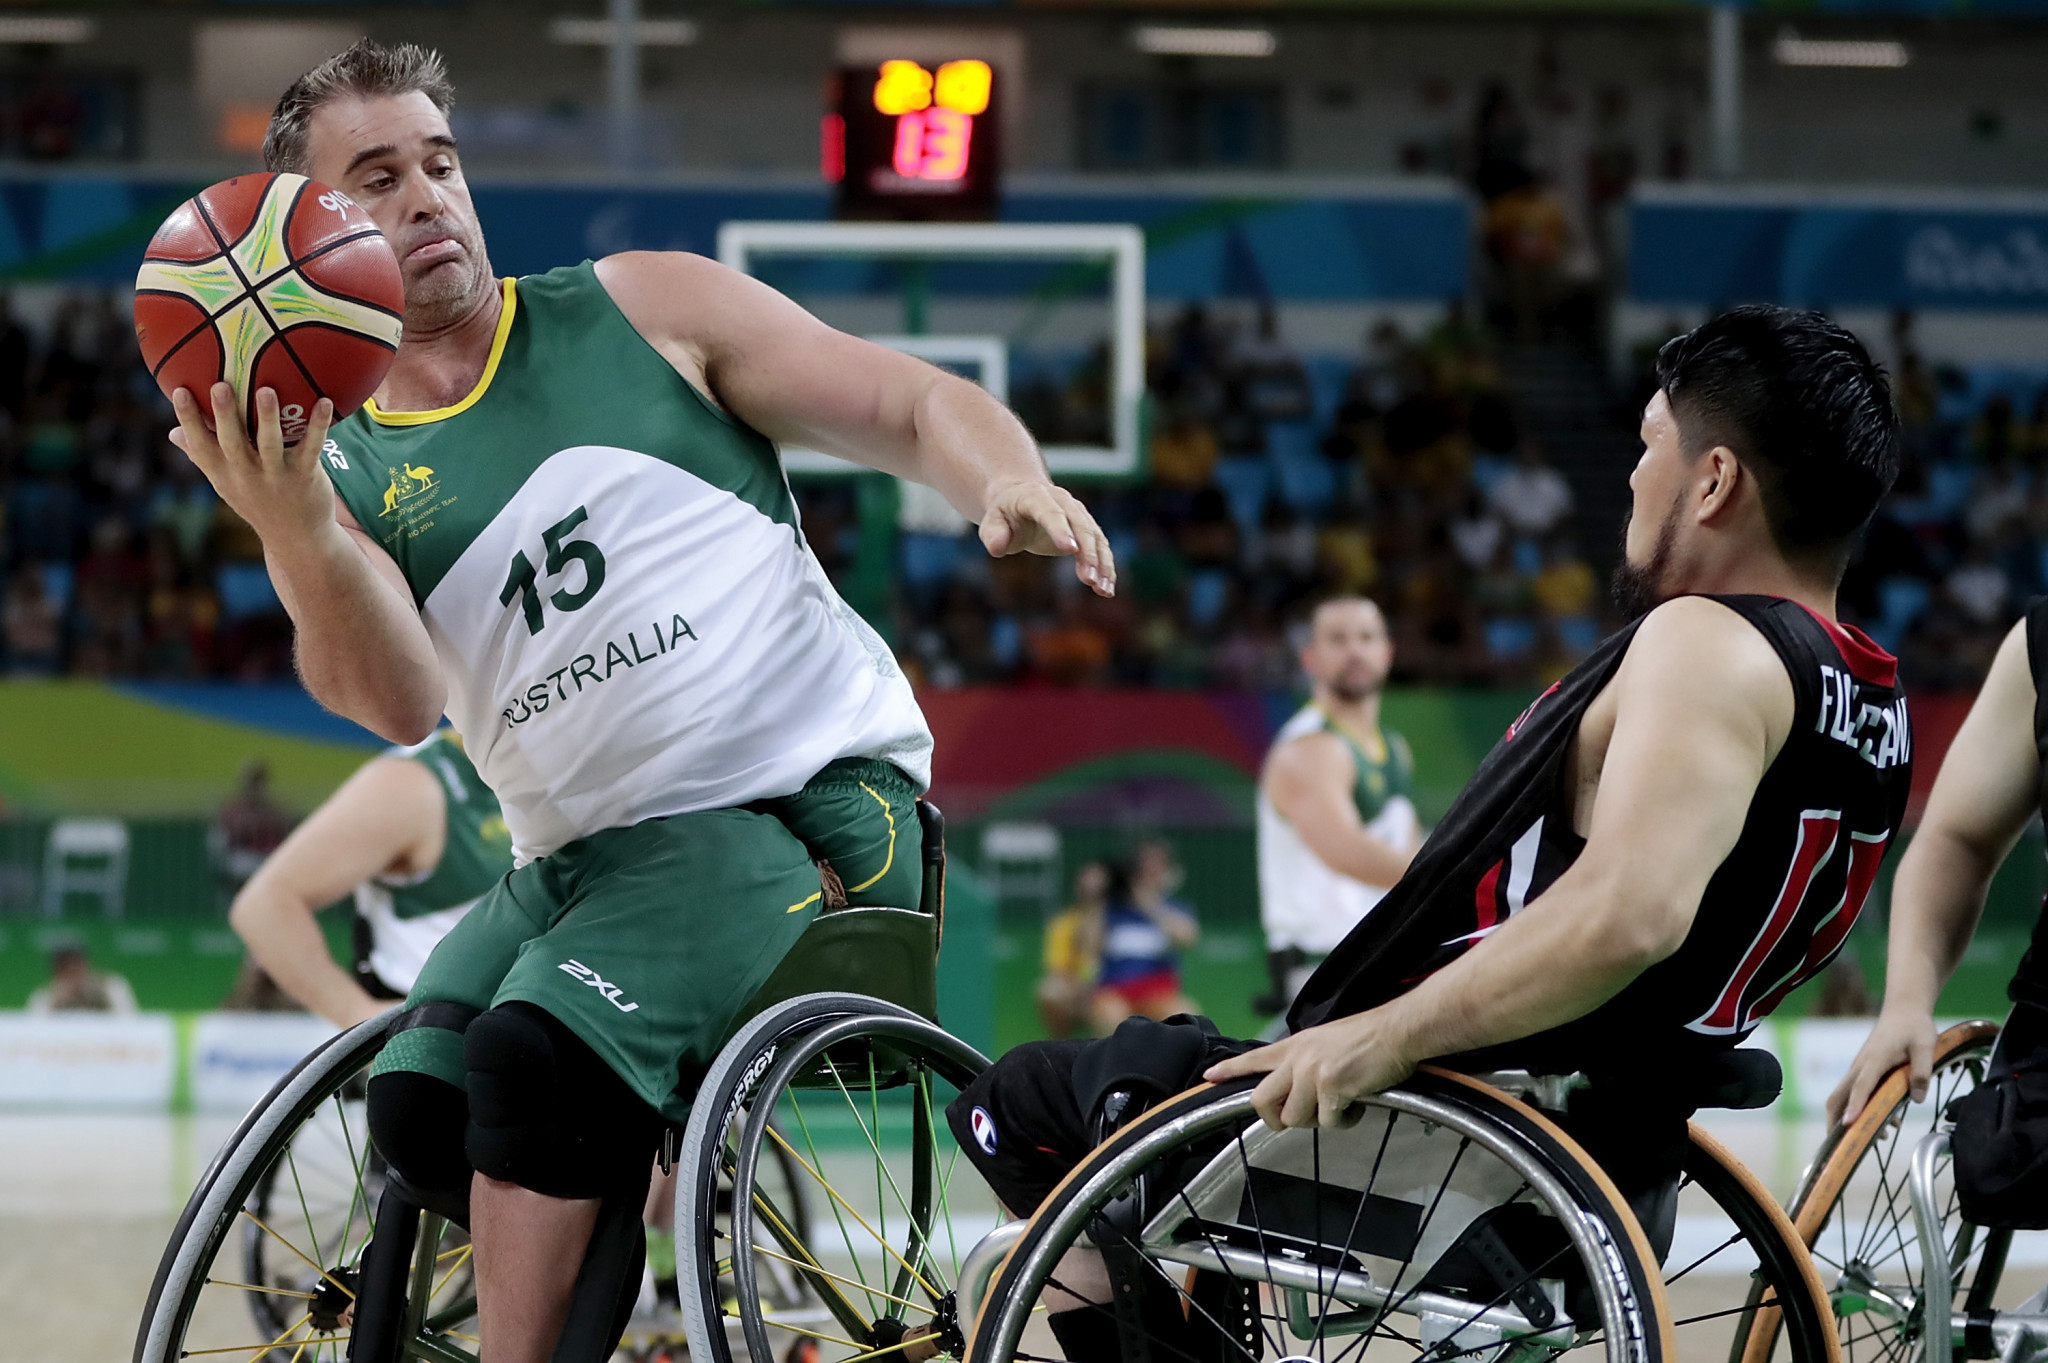 The Rollers won the IWBF World Championships in 2010 and 2014 ©Getty Images